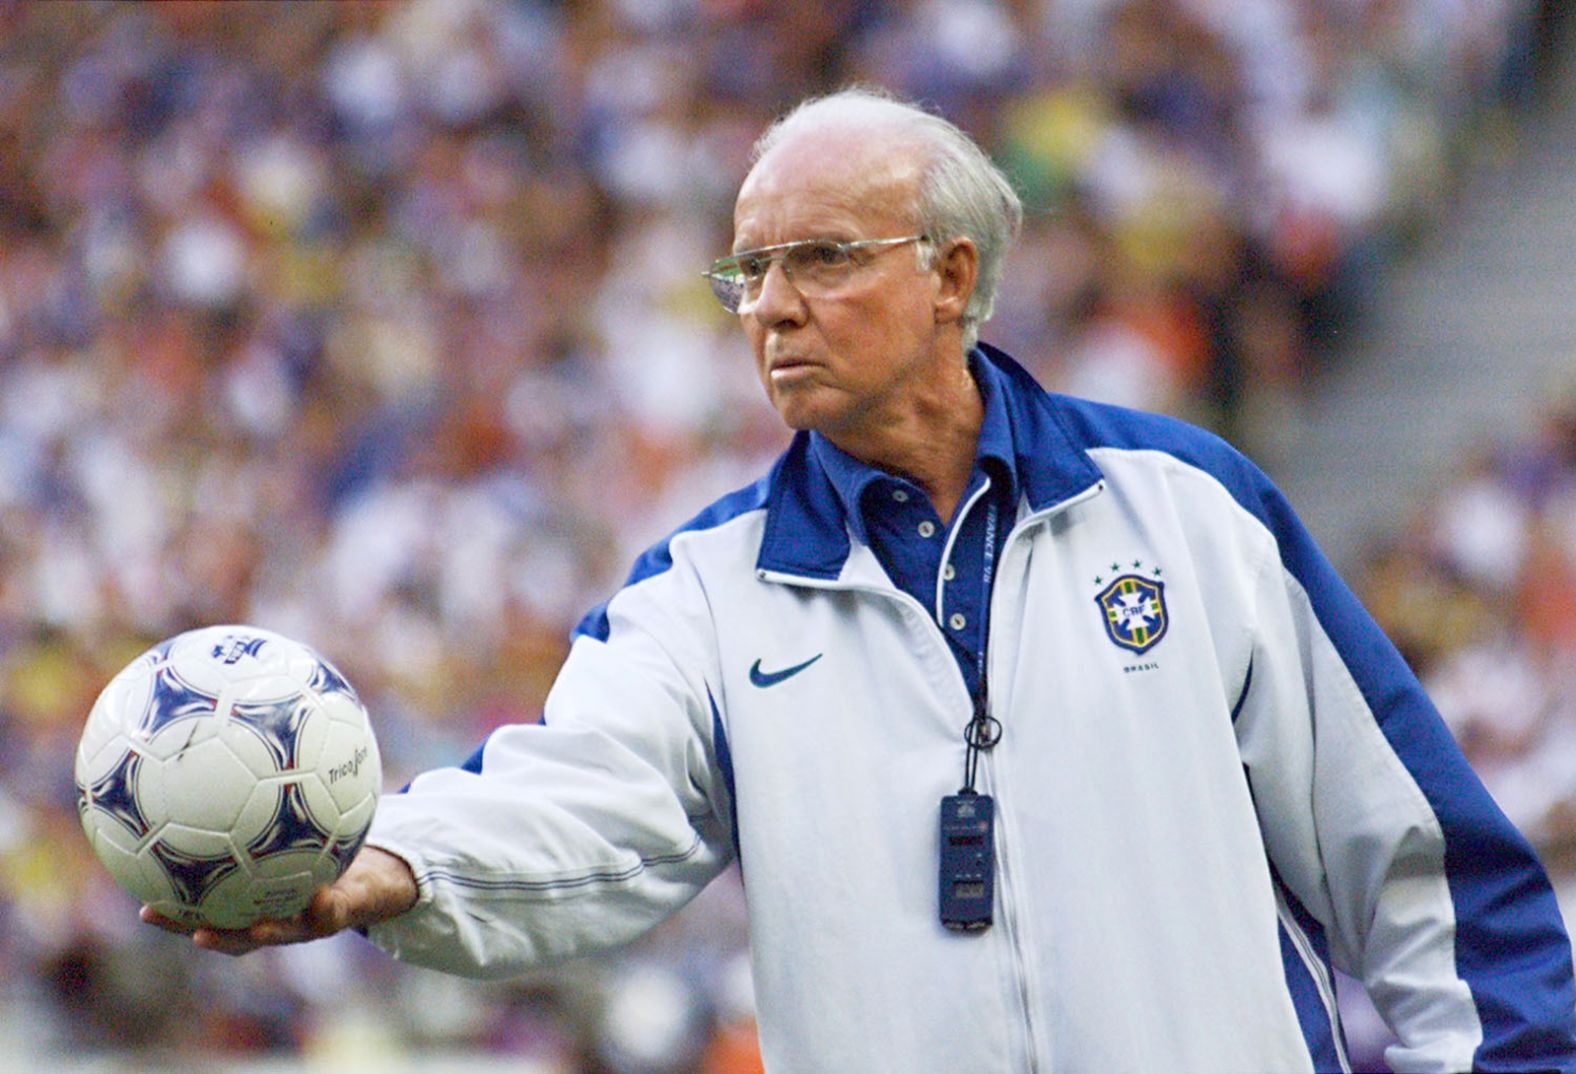 Soccer icon <a href="index.php?page=&url=https%3A%2F%2Fwww.cnn.com%2F2024%2F01%2F06%2Fsport%2Fmario-zagallo-dies-aged-92-spt-intl" target="_blank">Mário Zagallo</a>, a four-time World Cup winner with Brazil as a player and coach, died at the age of 92, a post on his official Instagram account announced on January 6.